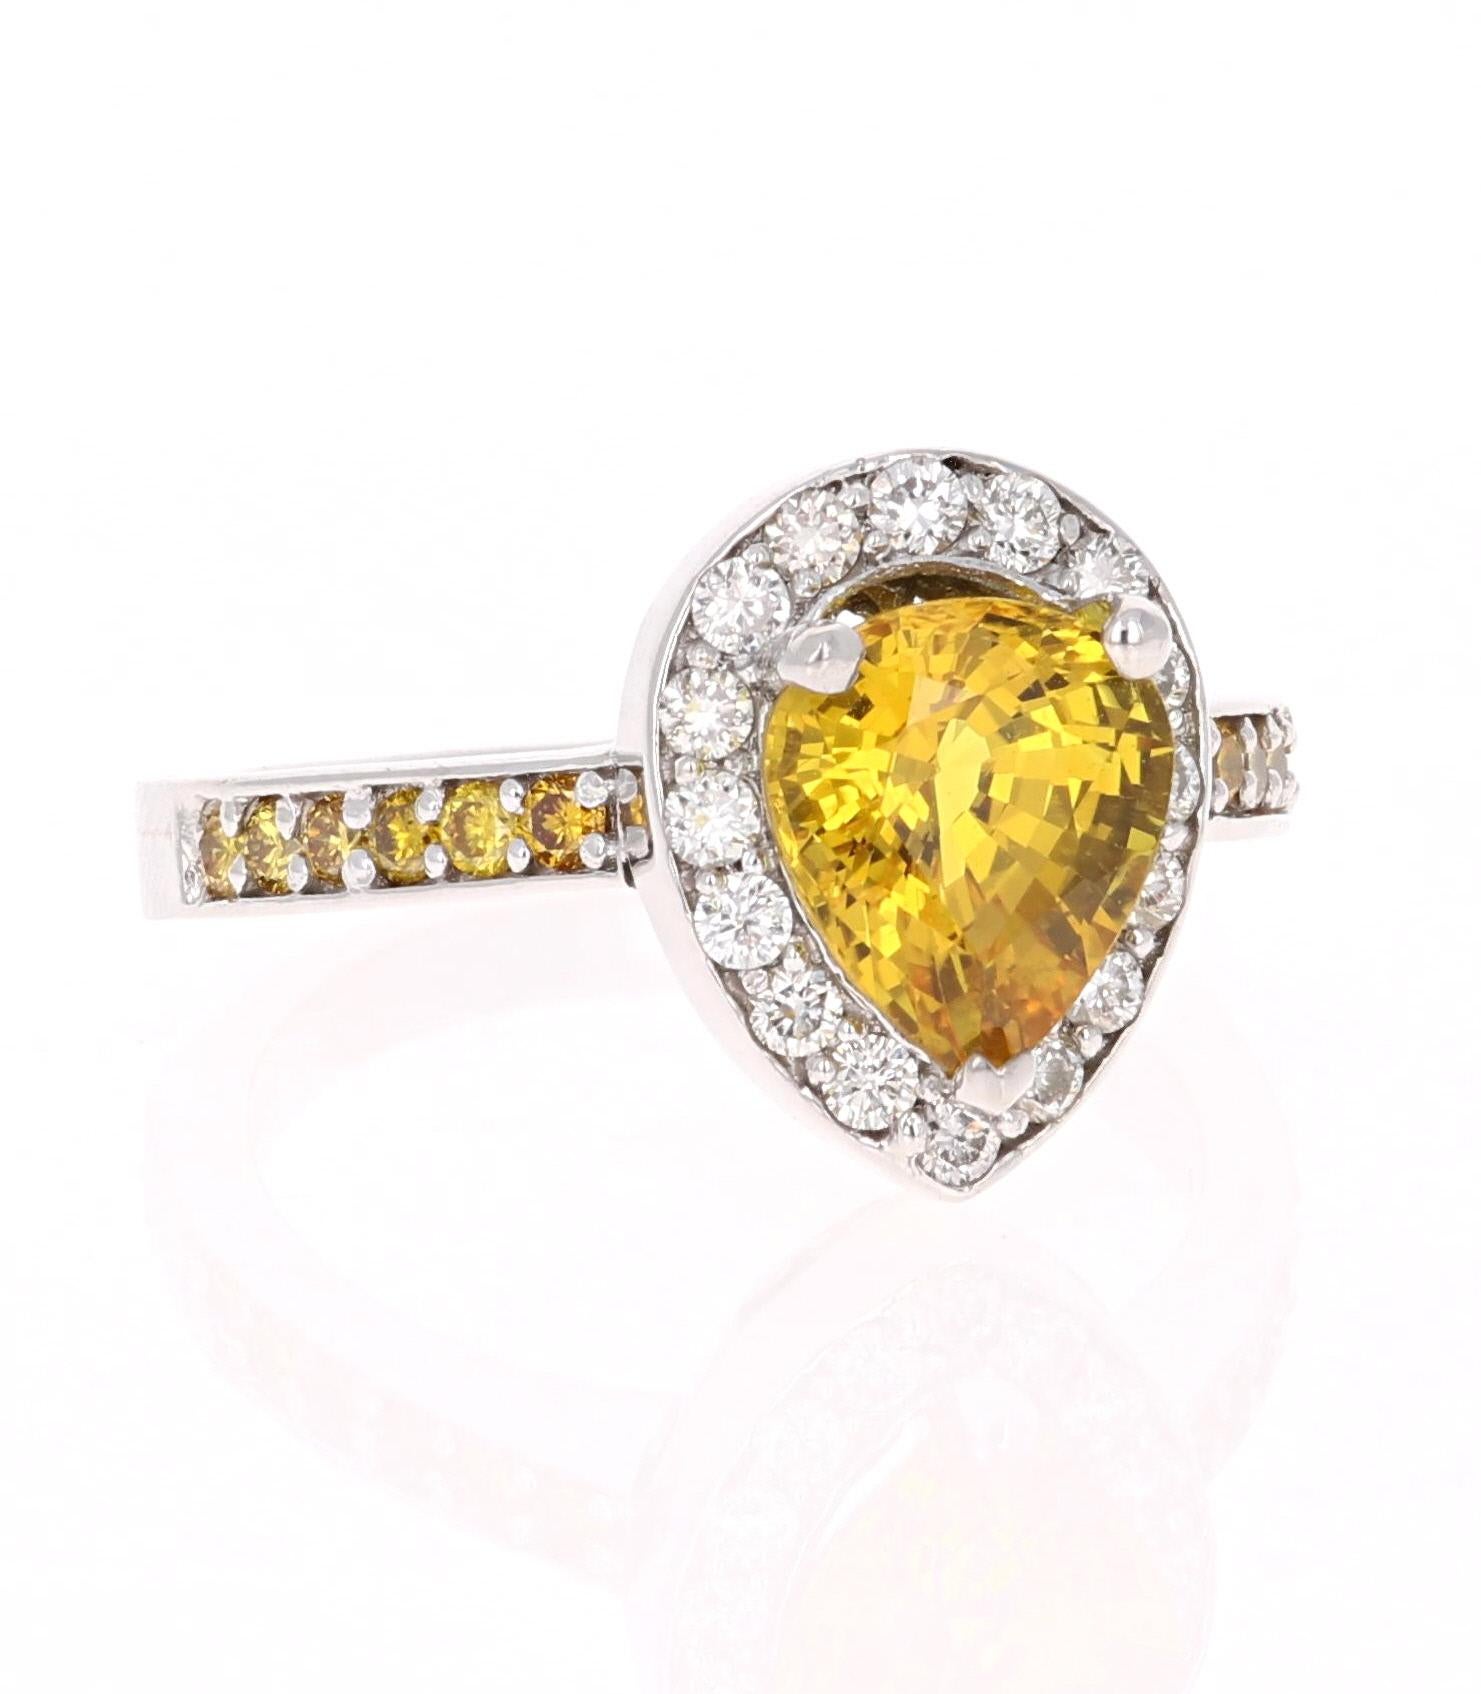 A unique Yellow Sapphire, Yellow and White Diamond Ring that can be a beautiful Engagement Ring. 
The Pear Cut Yellow Sapphire is 2.66 Carats. 
It has a halo of 16 Round Cut White Diamonds that weigh 0.37 Carats (Clarity: VS2, Color: H).  The shank